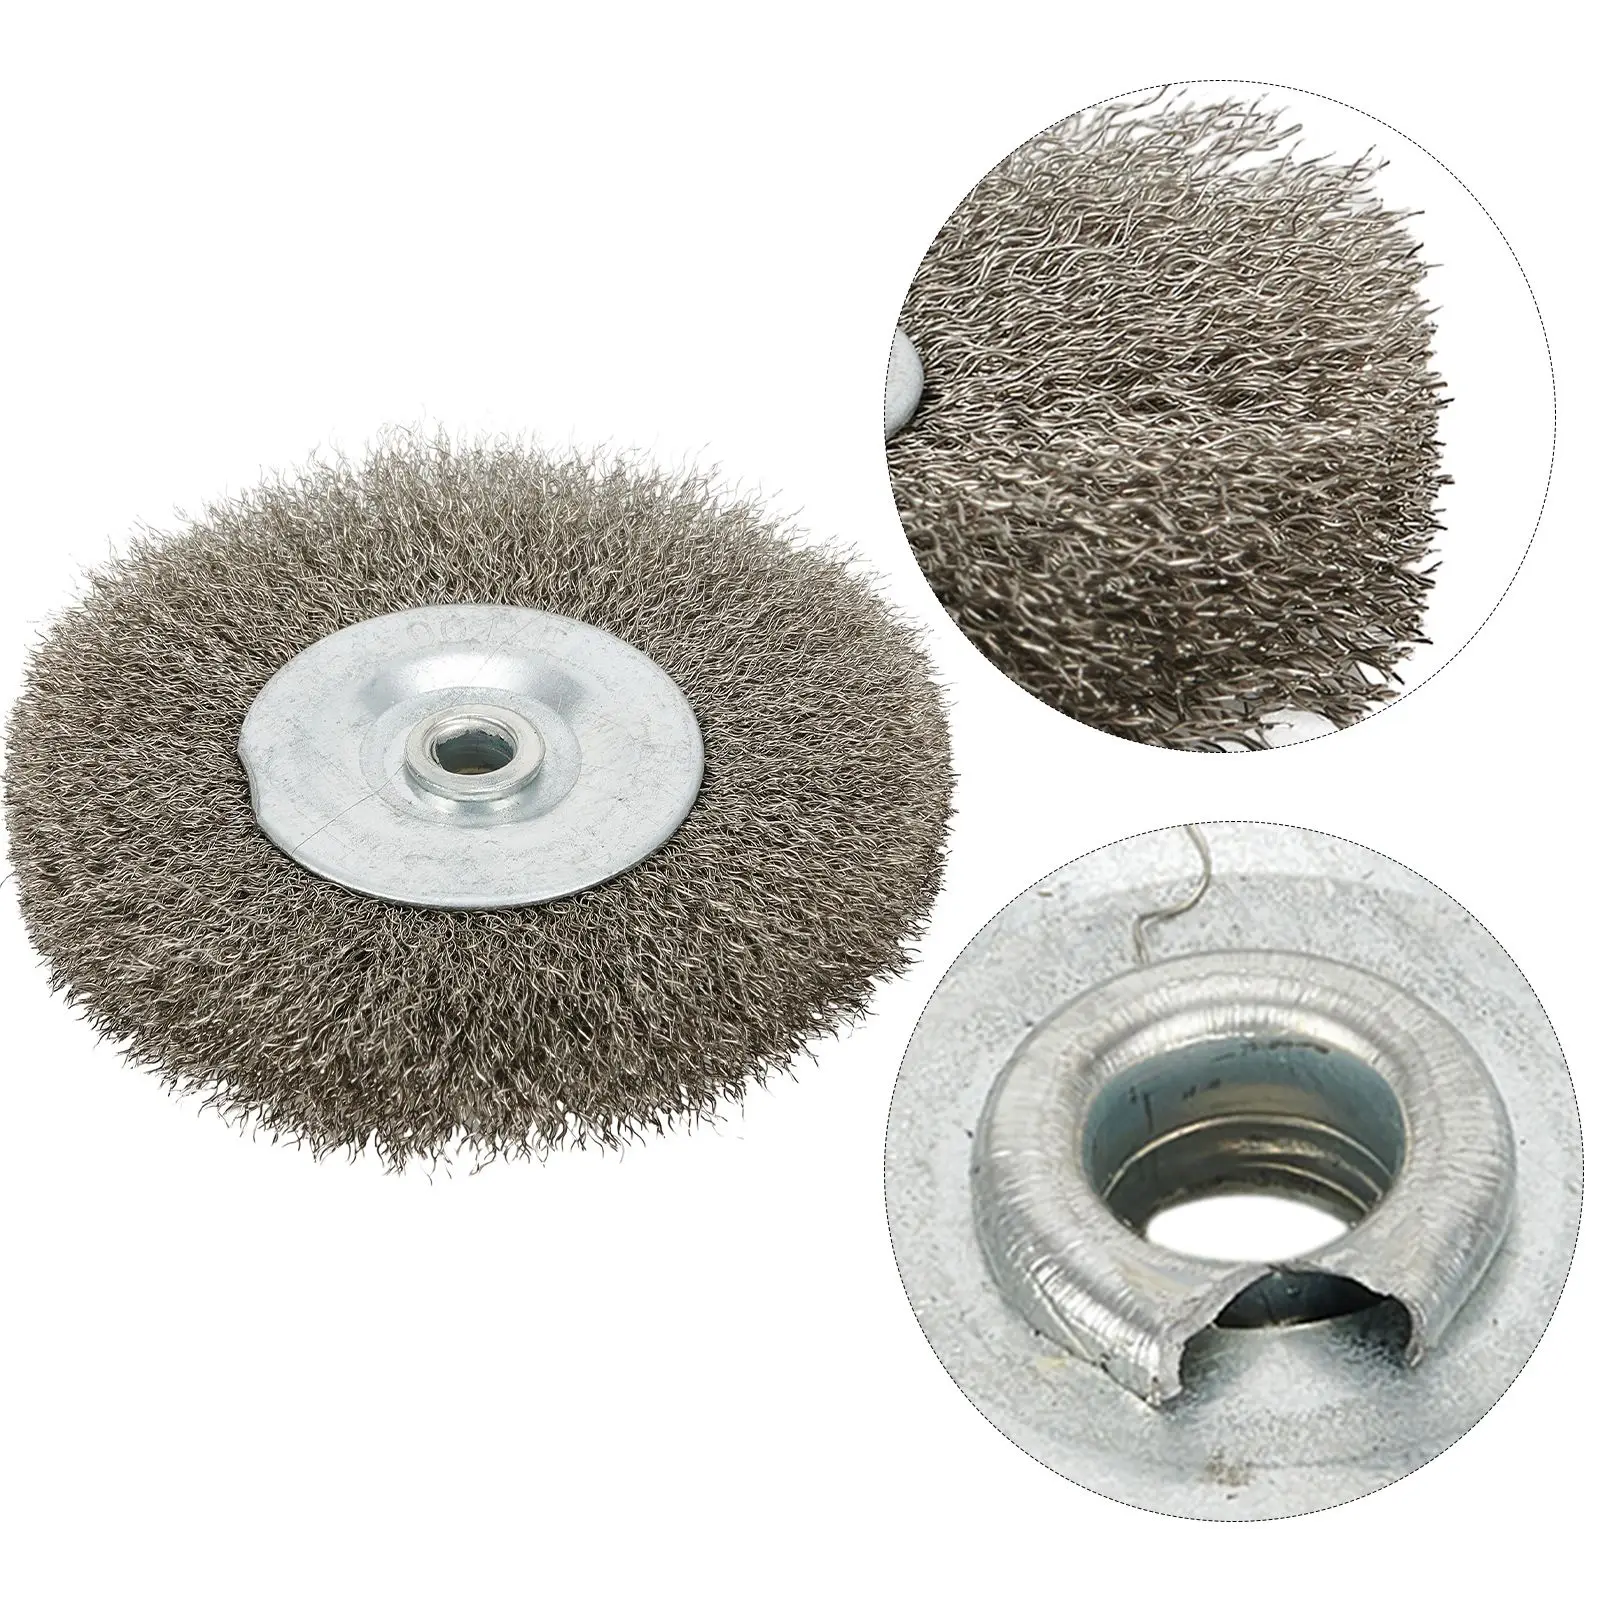 Flat Crimped Wire Wheel Brush For Angle Grinder 0.52in Bore Stainless Steel 3inch Outer Diamter 13mm Internal Diamter Power Tool heavy duty metal retractable badge holders carabiner keychain key ring id card holder 28 3inch reinforced steel wire cord